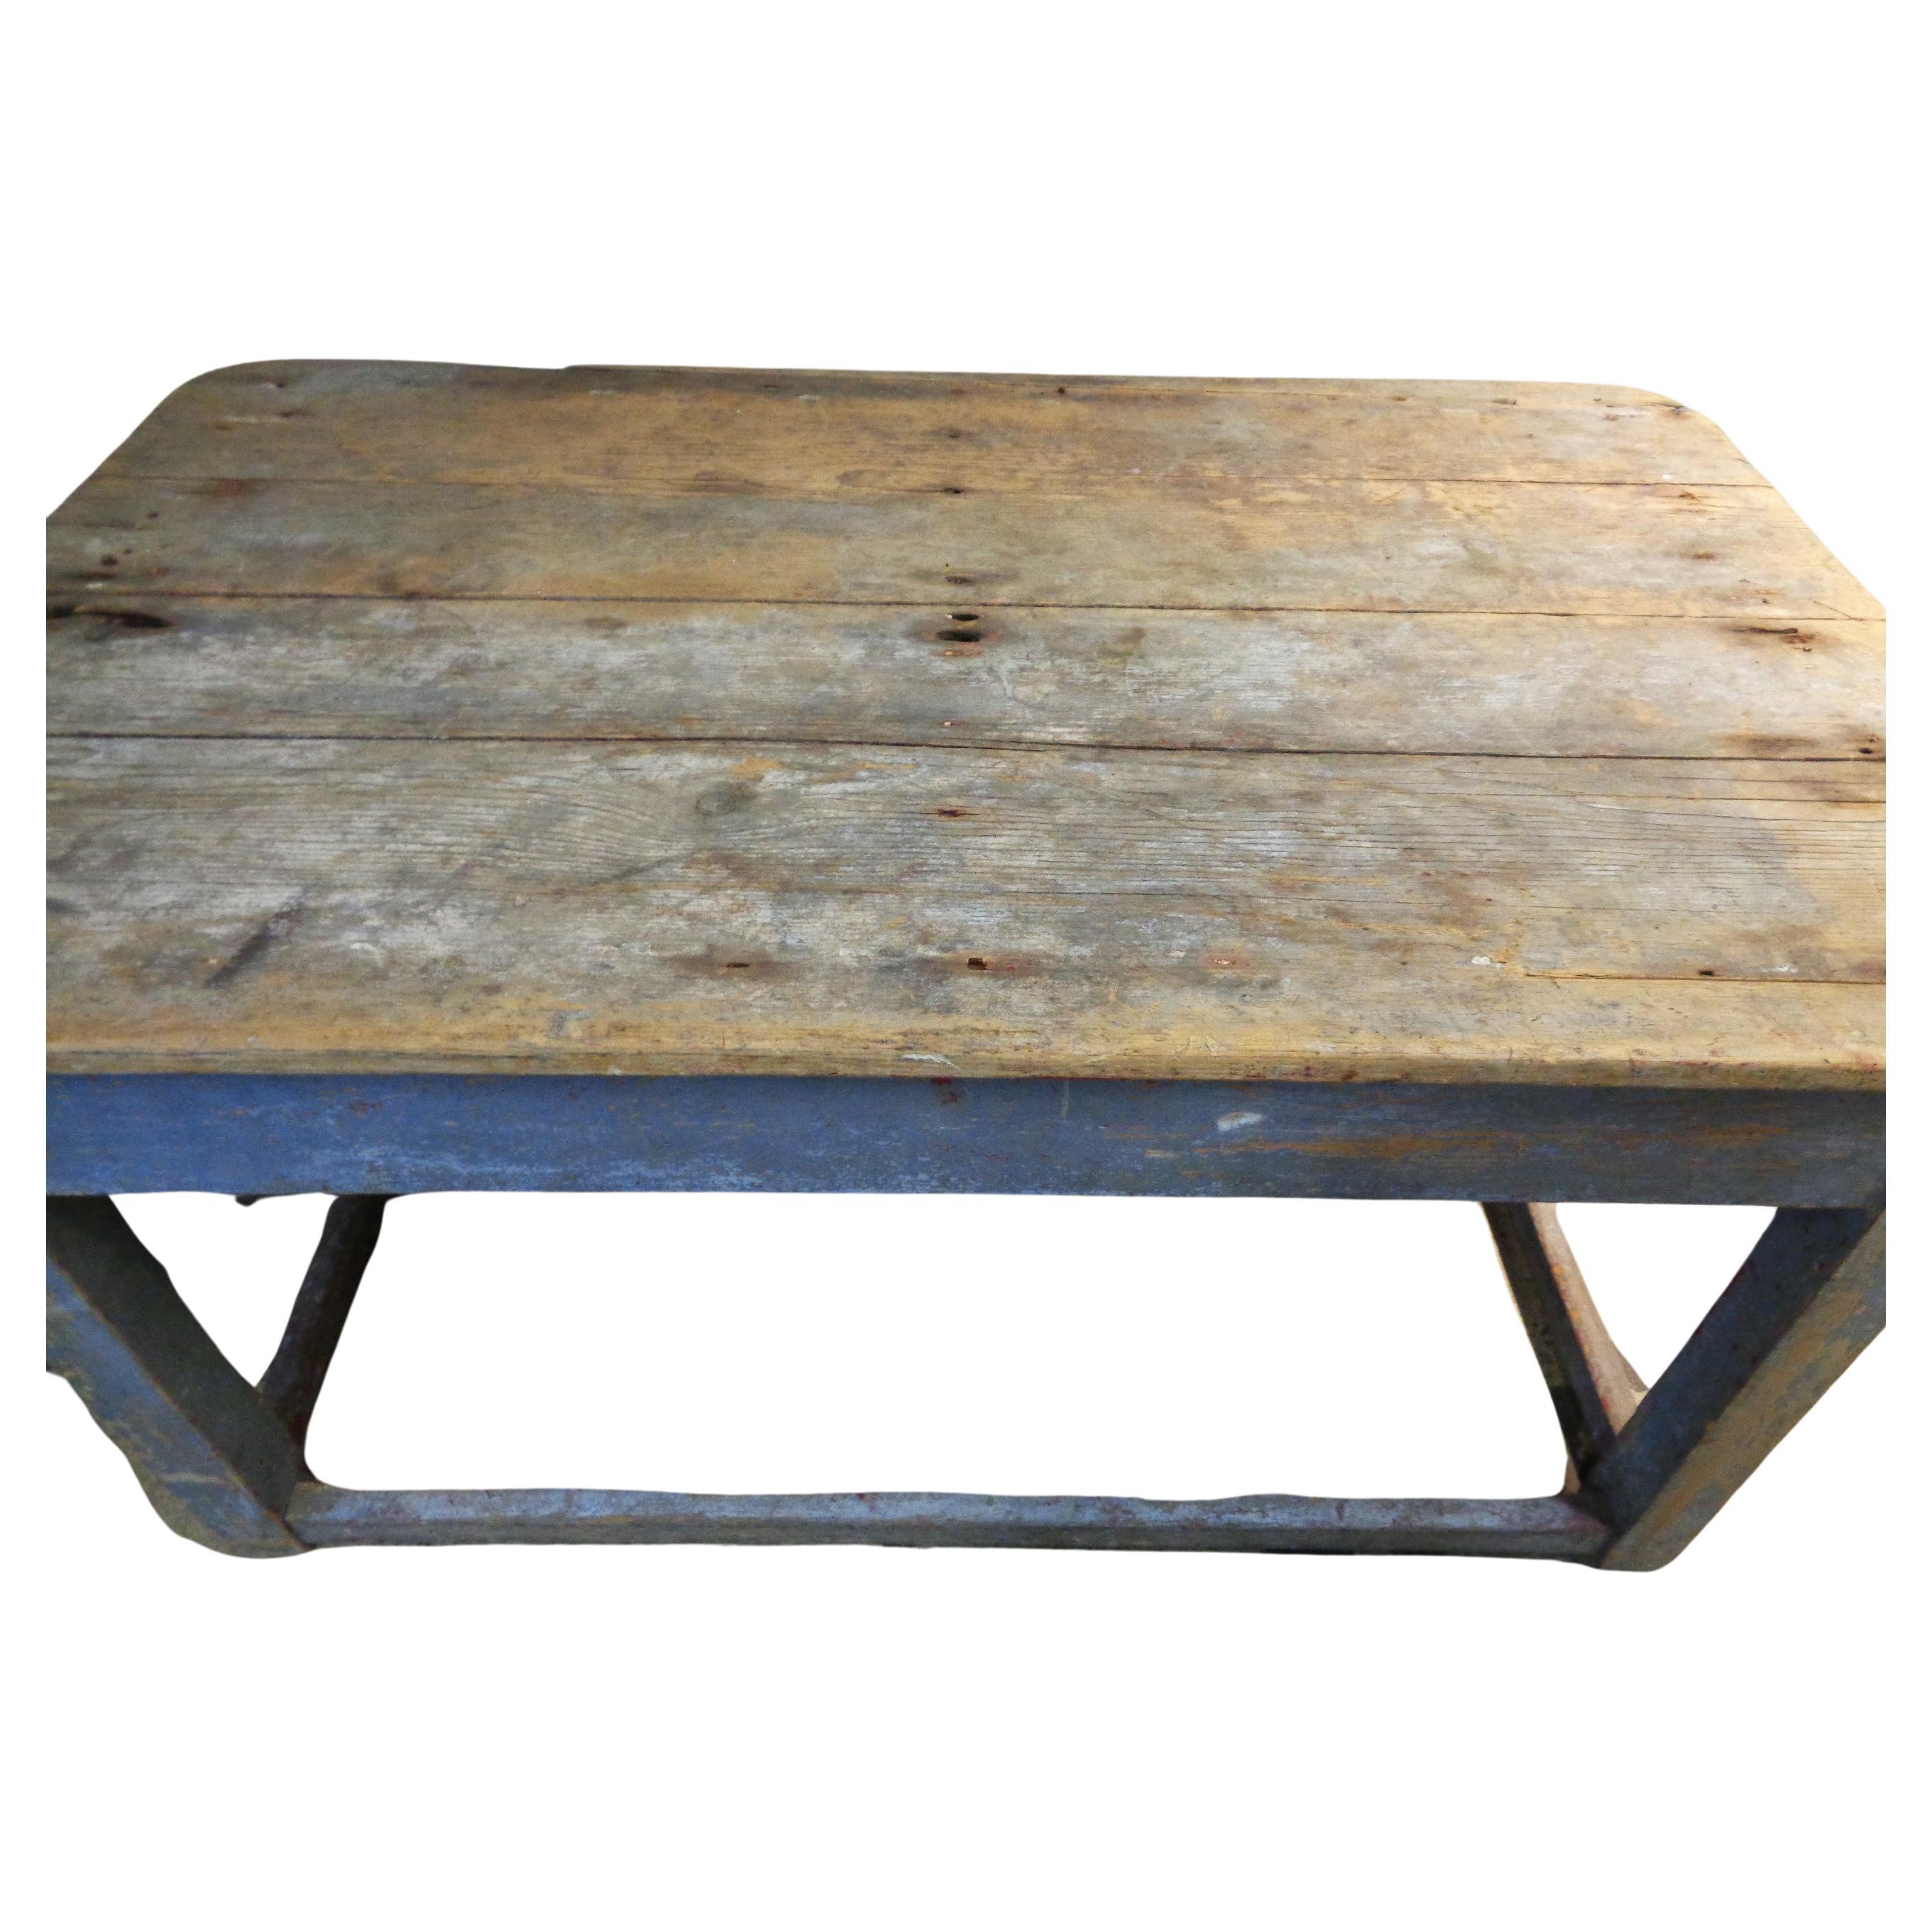  Early 19th Century Original Blue Painted Rustic Work Table  im Angebot 1